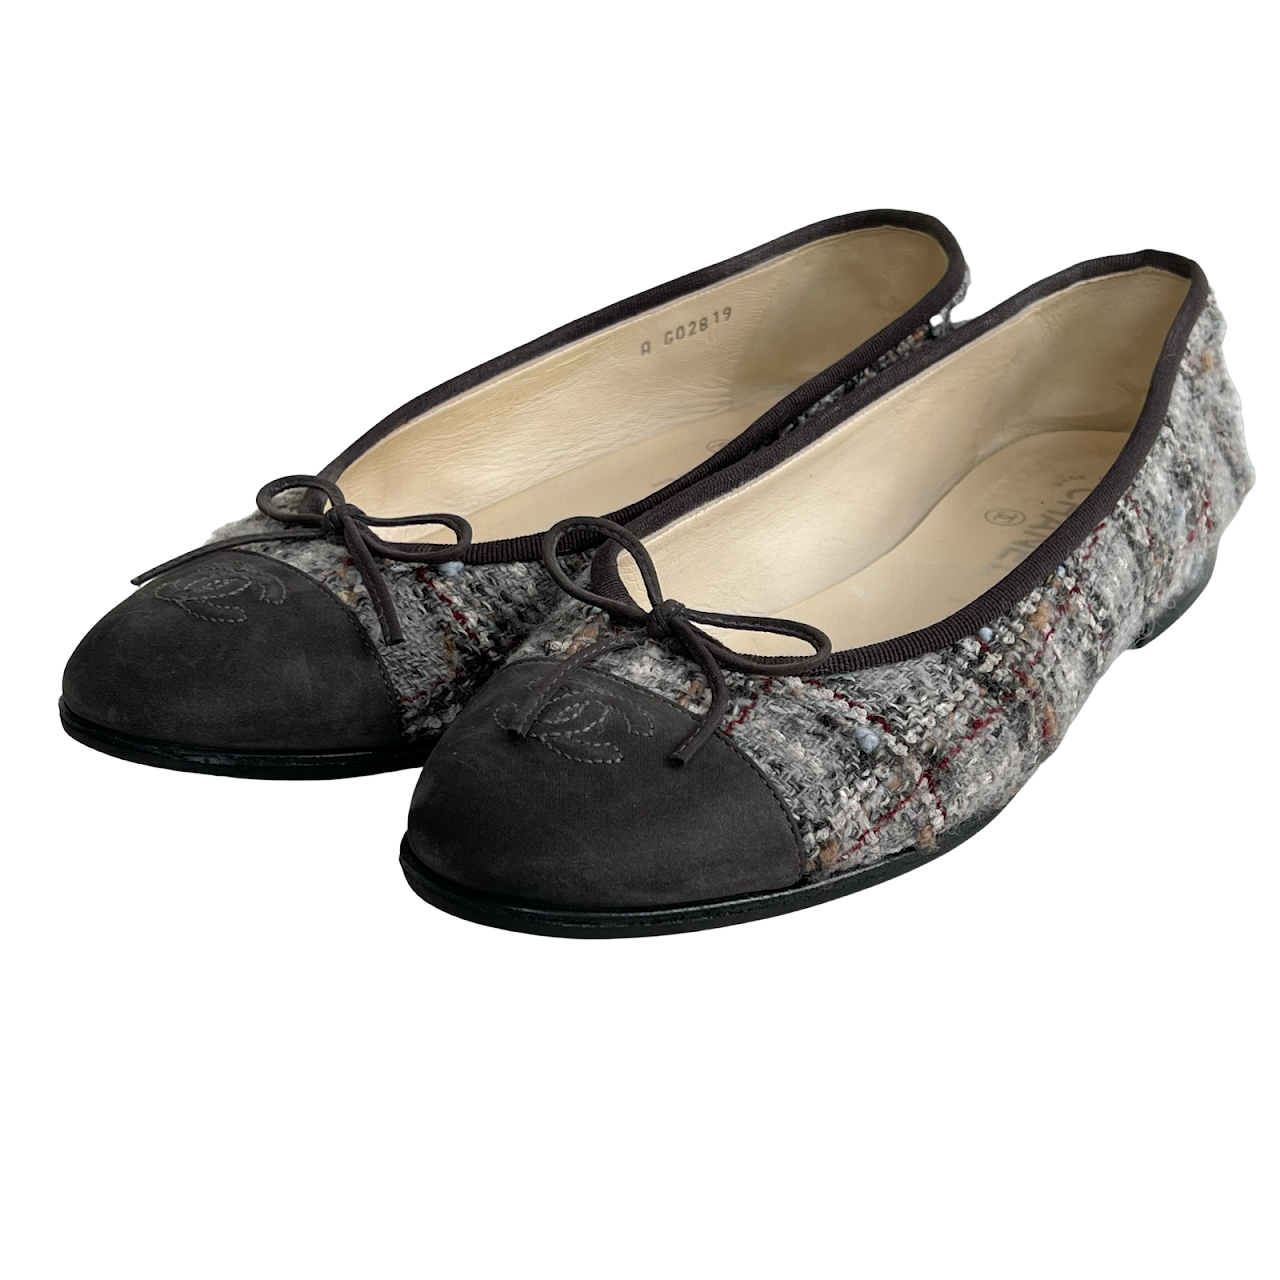 Chanel Black and White Tweed Cap Toe CC Bow Ballet Flats Size 38.5 Chanel |  The Luxury Closet